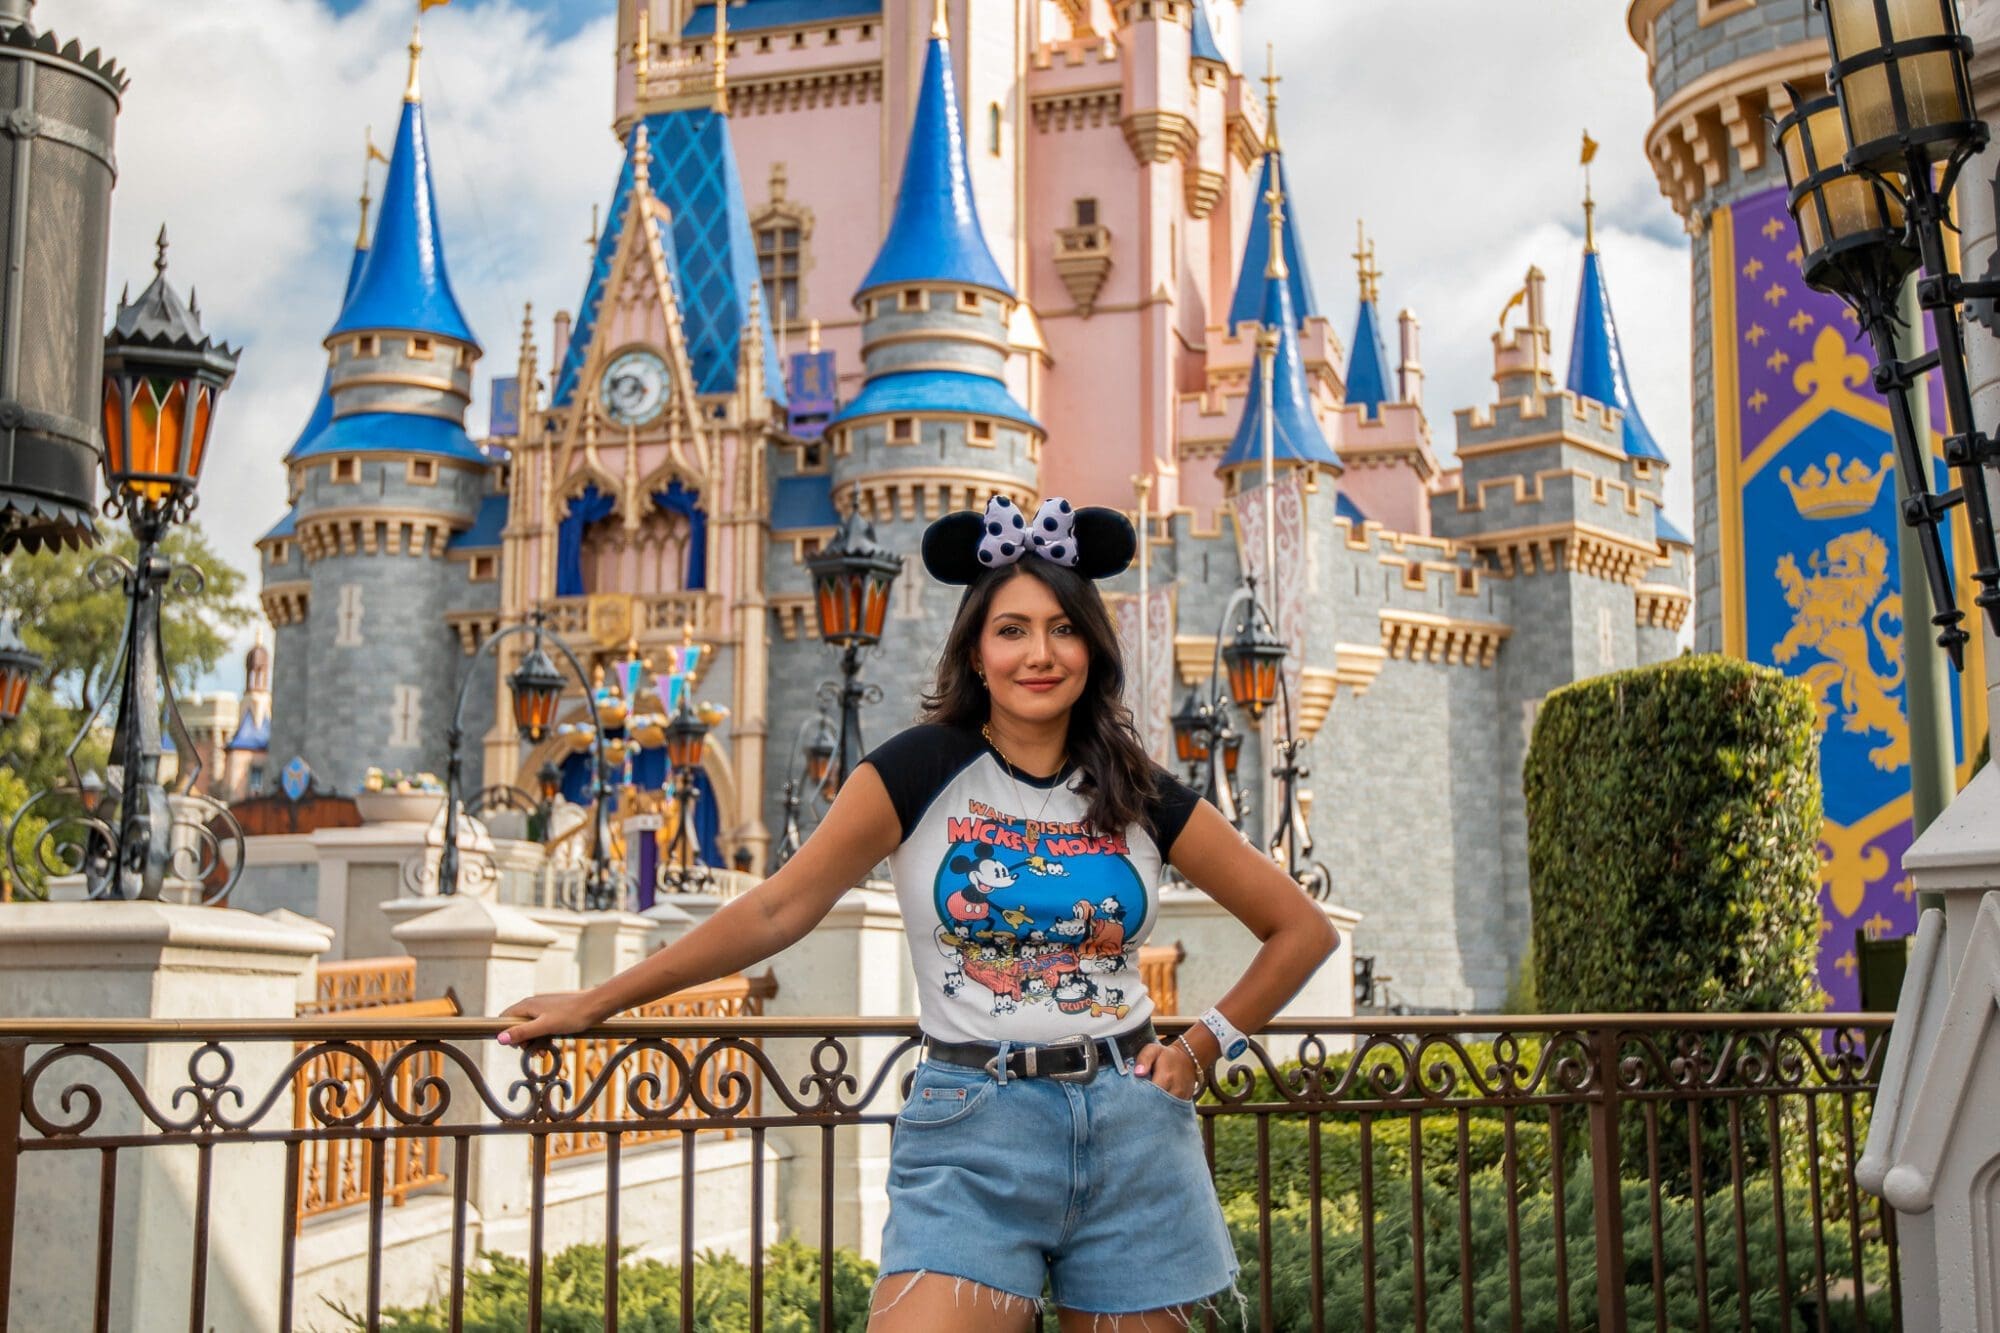 Walt Disney World Florida - Walt Disney World Florida travel guide